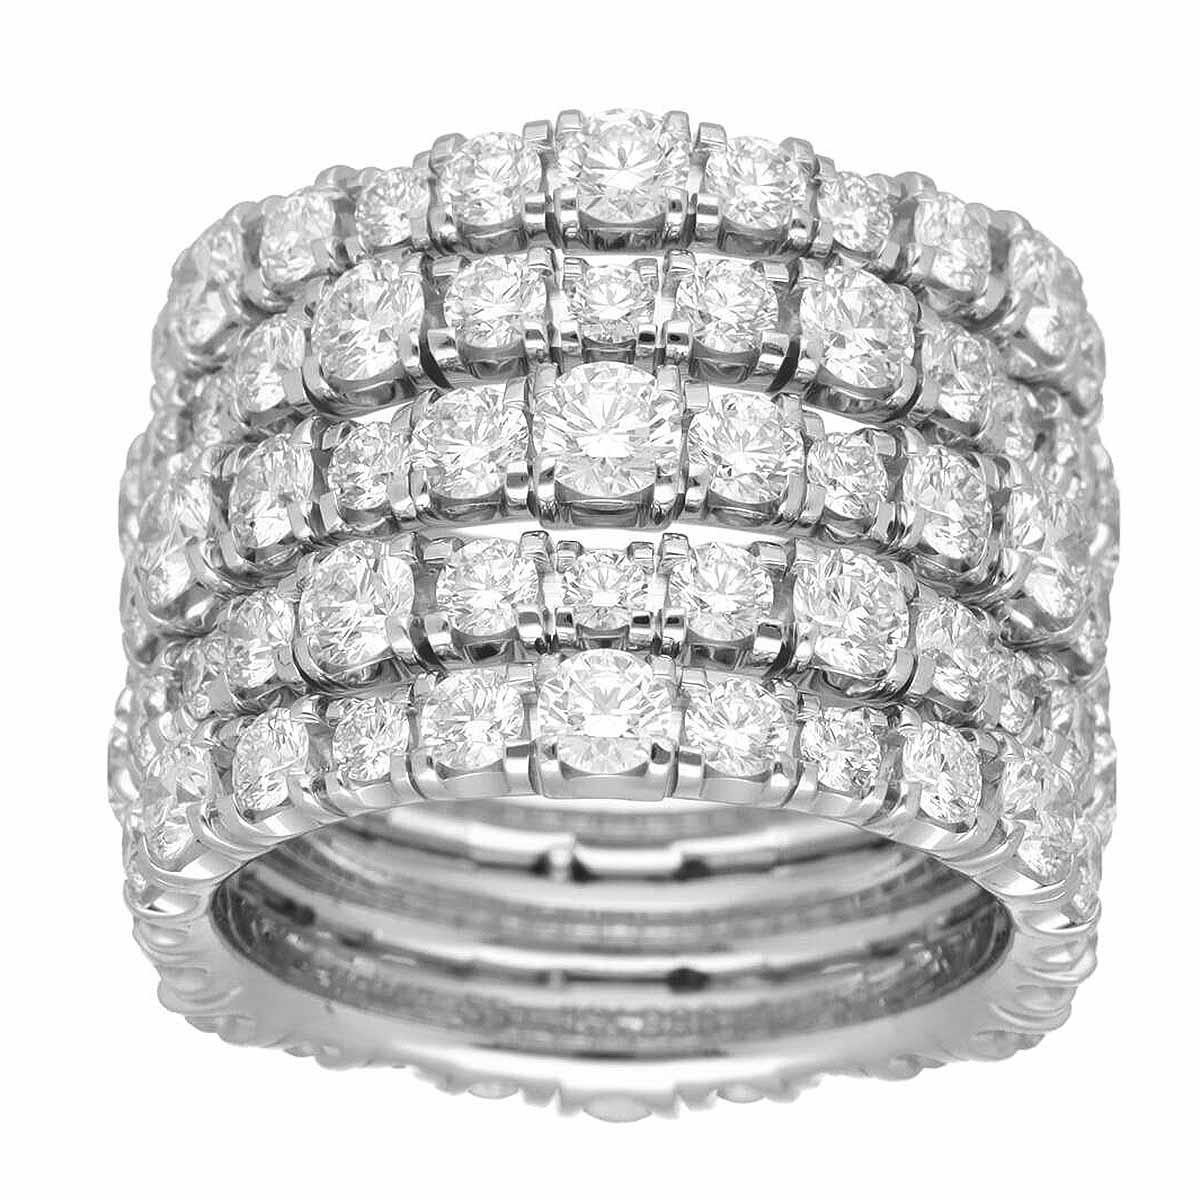 Brand:Cartier
Retail Price:JPY6,798,000円(included tax)
Name:Diamonds Essential Lines Ring
Ref.:H434555
Material:120P diamond (7.16ct), 750 K18 WG white gold
Weight:19.4g(approx)
Ring size(inch): EU:55  /  USA：7.5（Approx)
Width(inch):17.04mm /